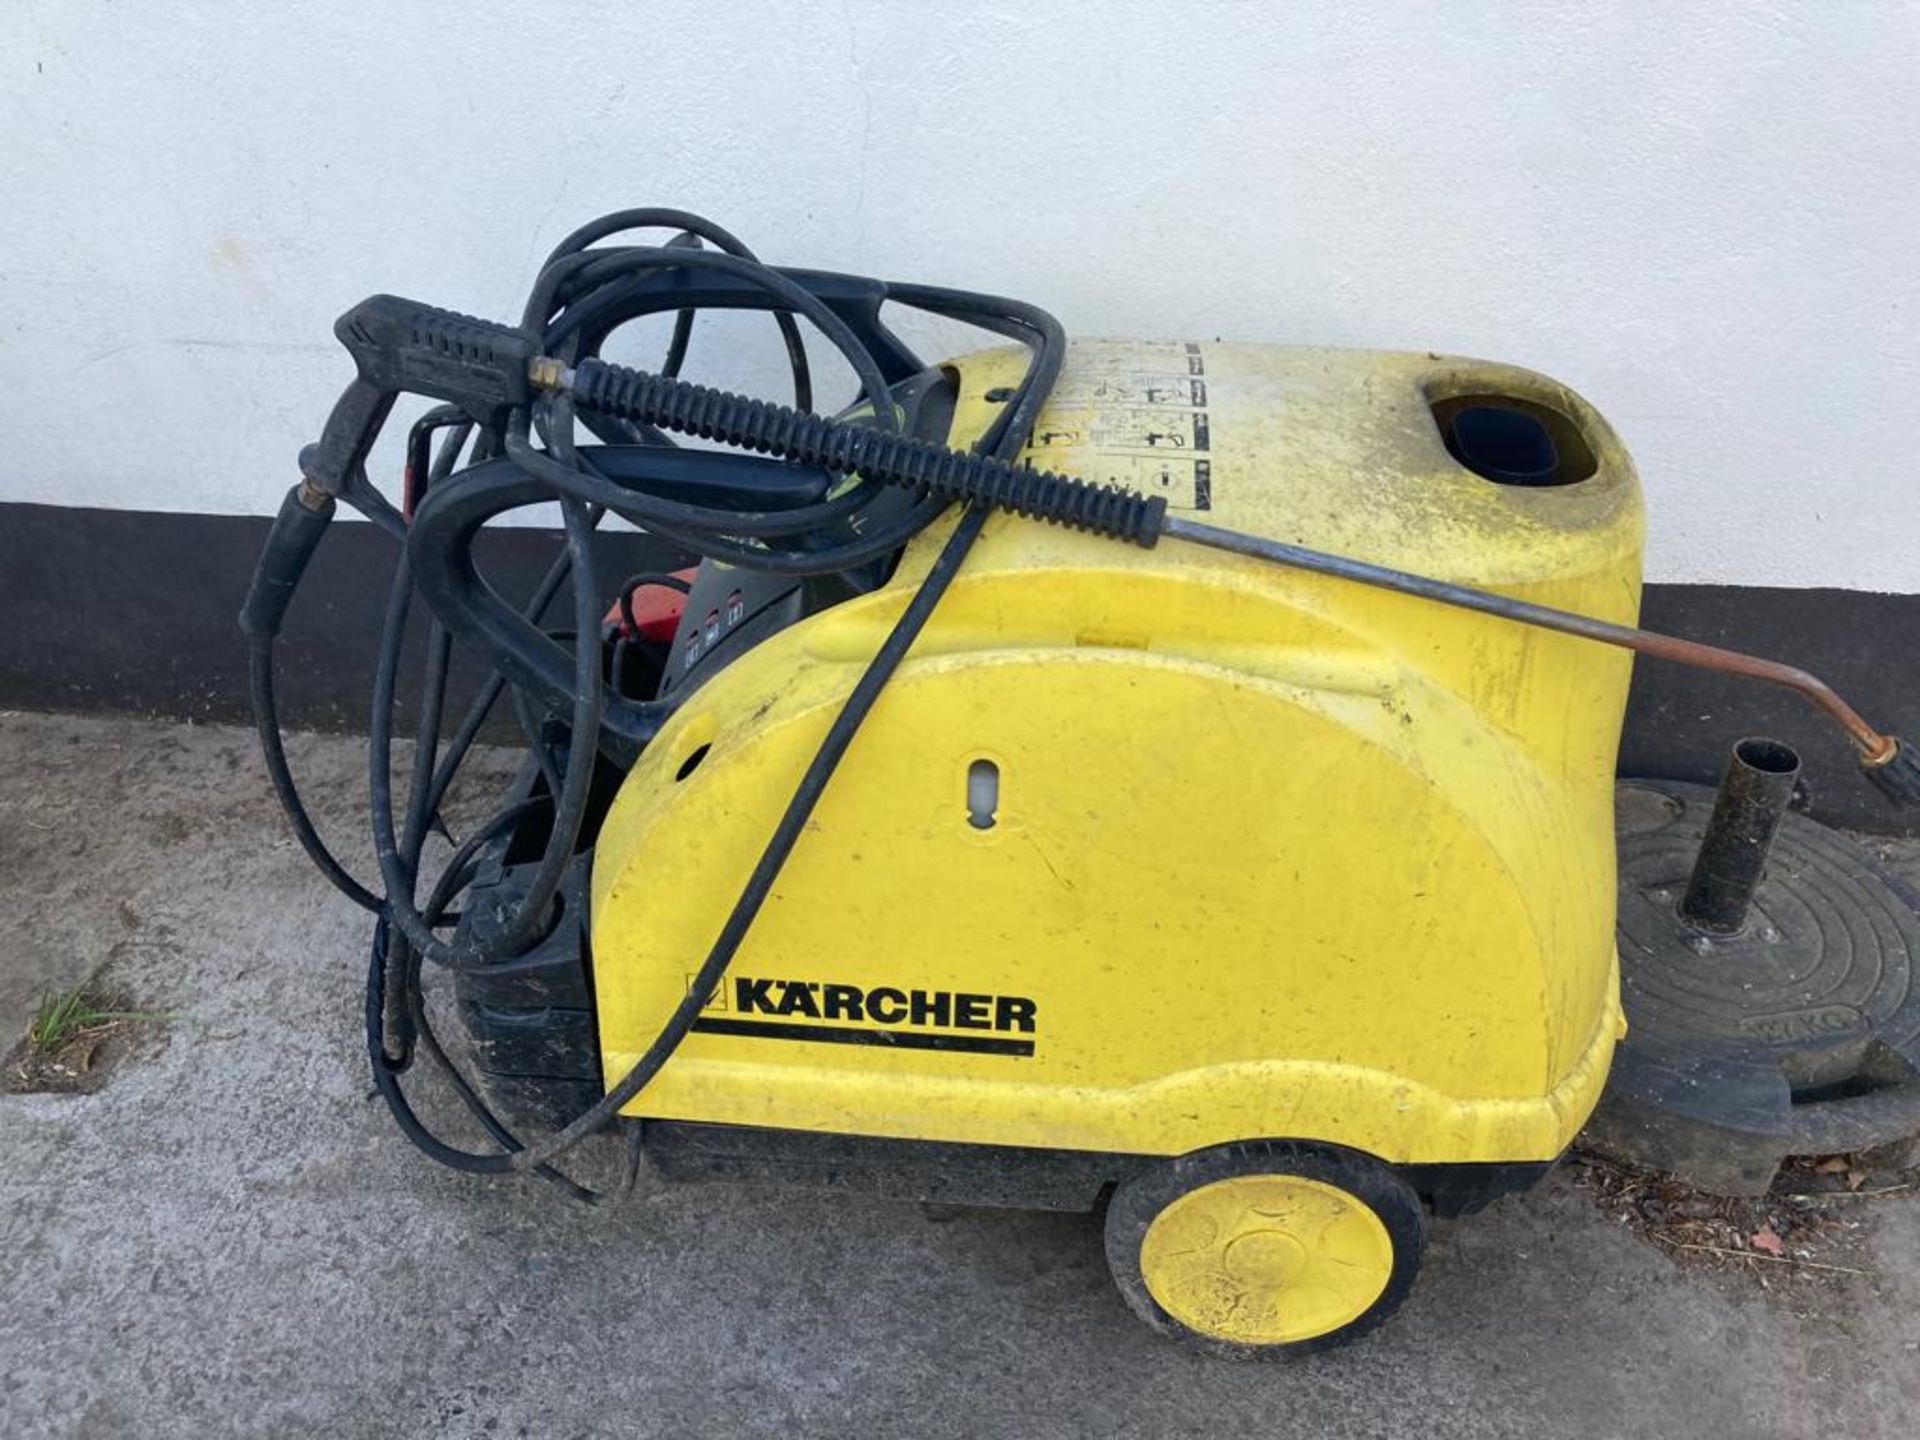 KARCHER DIESEL HOT AND COLD POWER WASHER LOCATION NORTHERN IREALND - Image 3 of 3